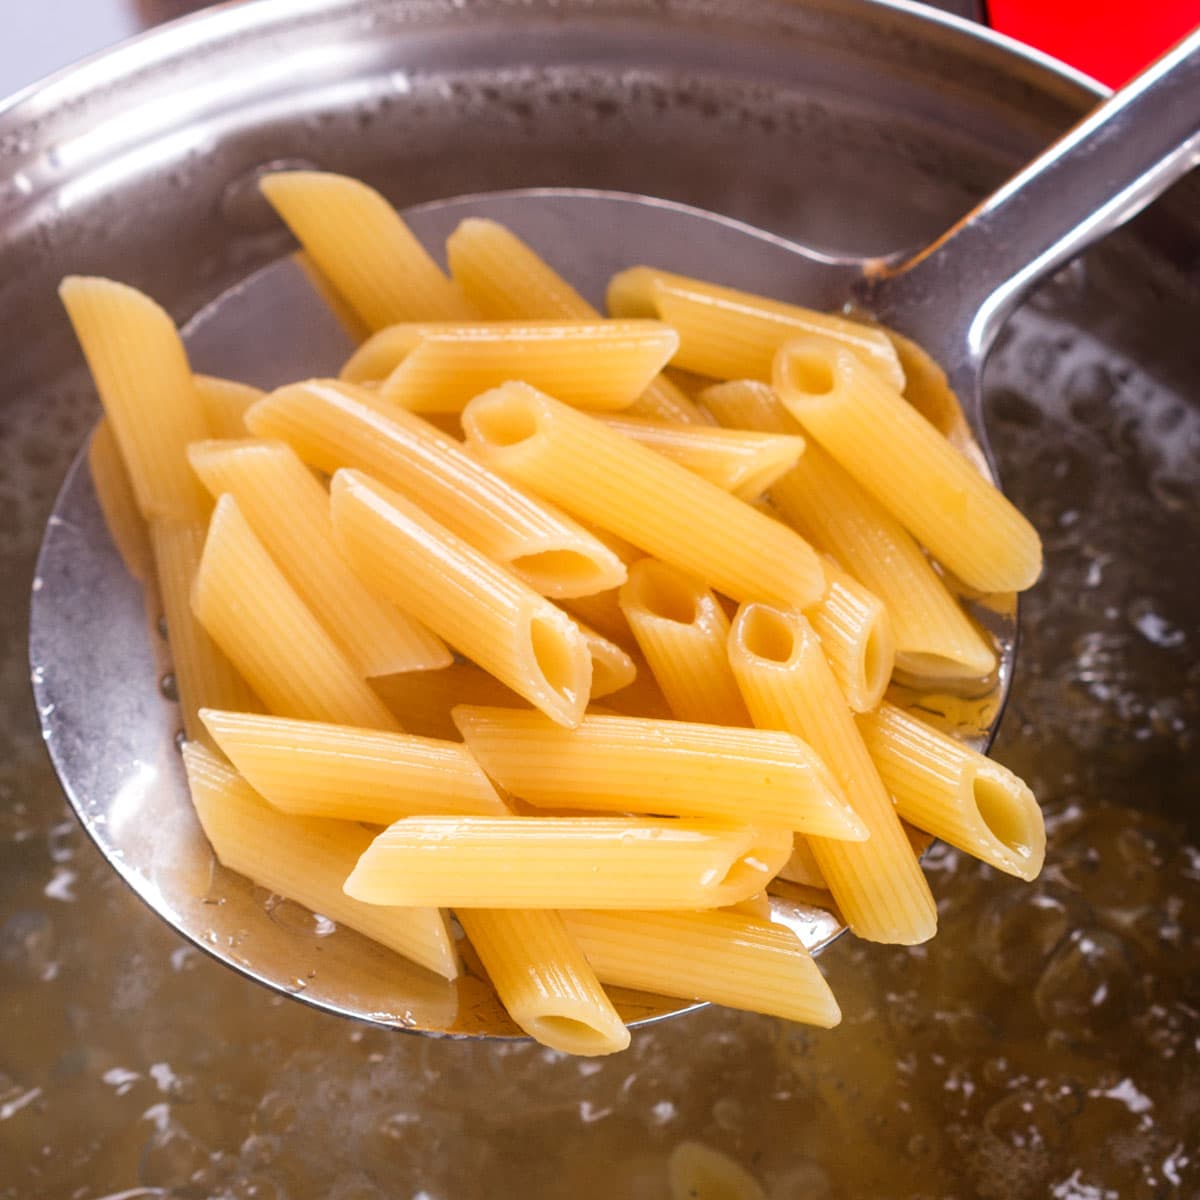 Using a slotted spoon works best for me. Not only does it allow you to quickly and easily remove the pasta from the boiling water, but it also allows some of the hot cooking liquid to drip off before adding it to the pan with the sauce.